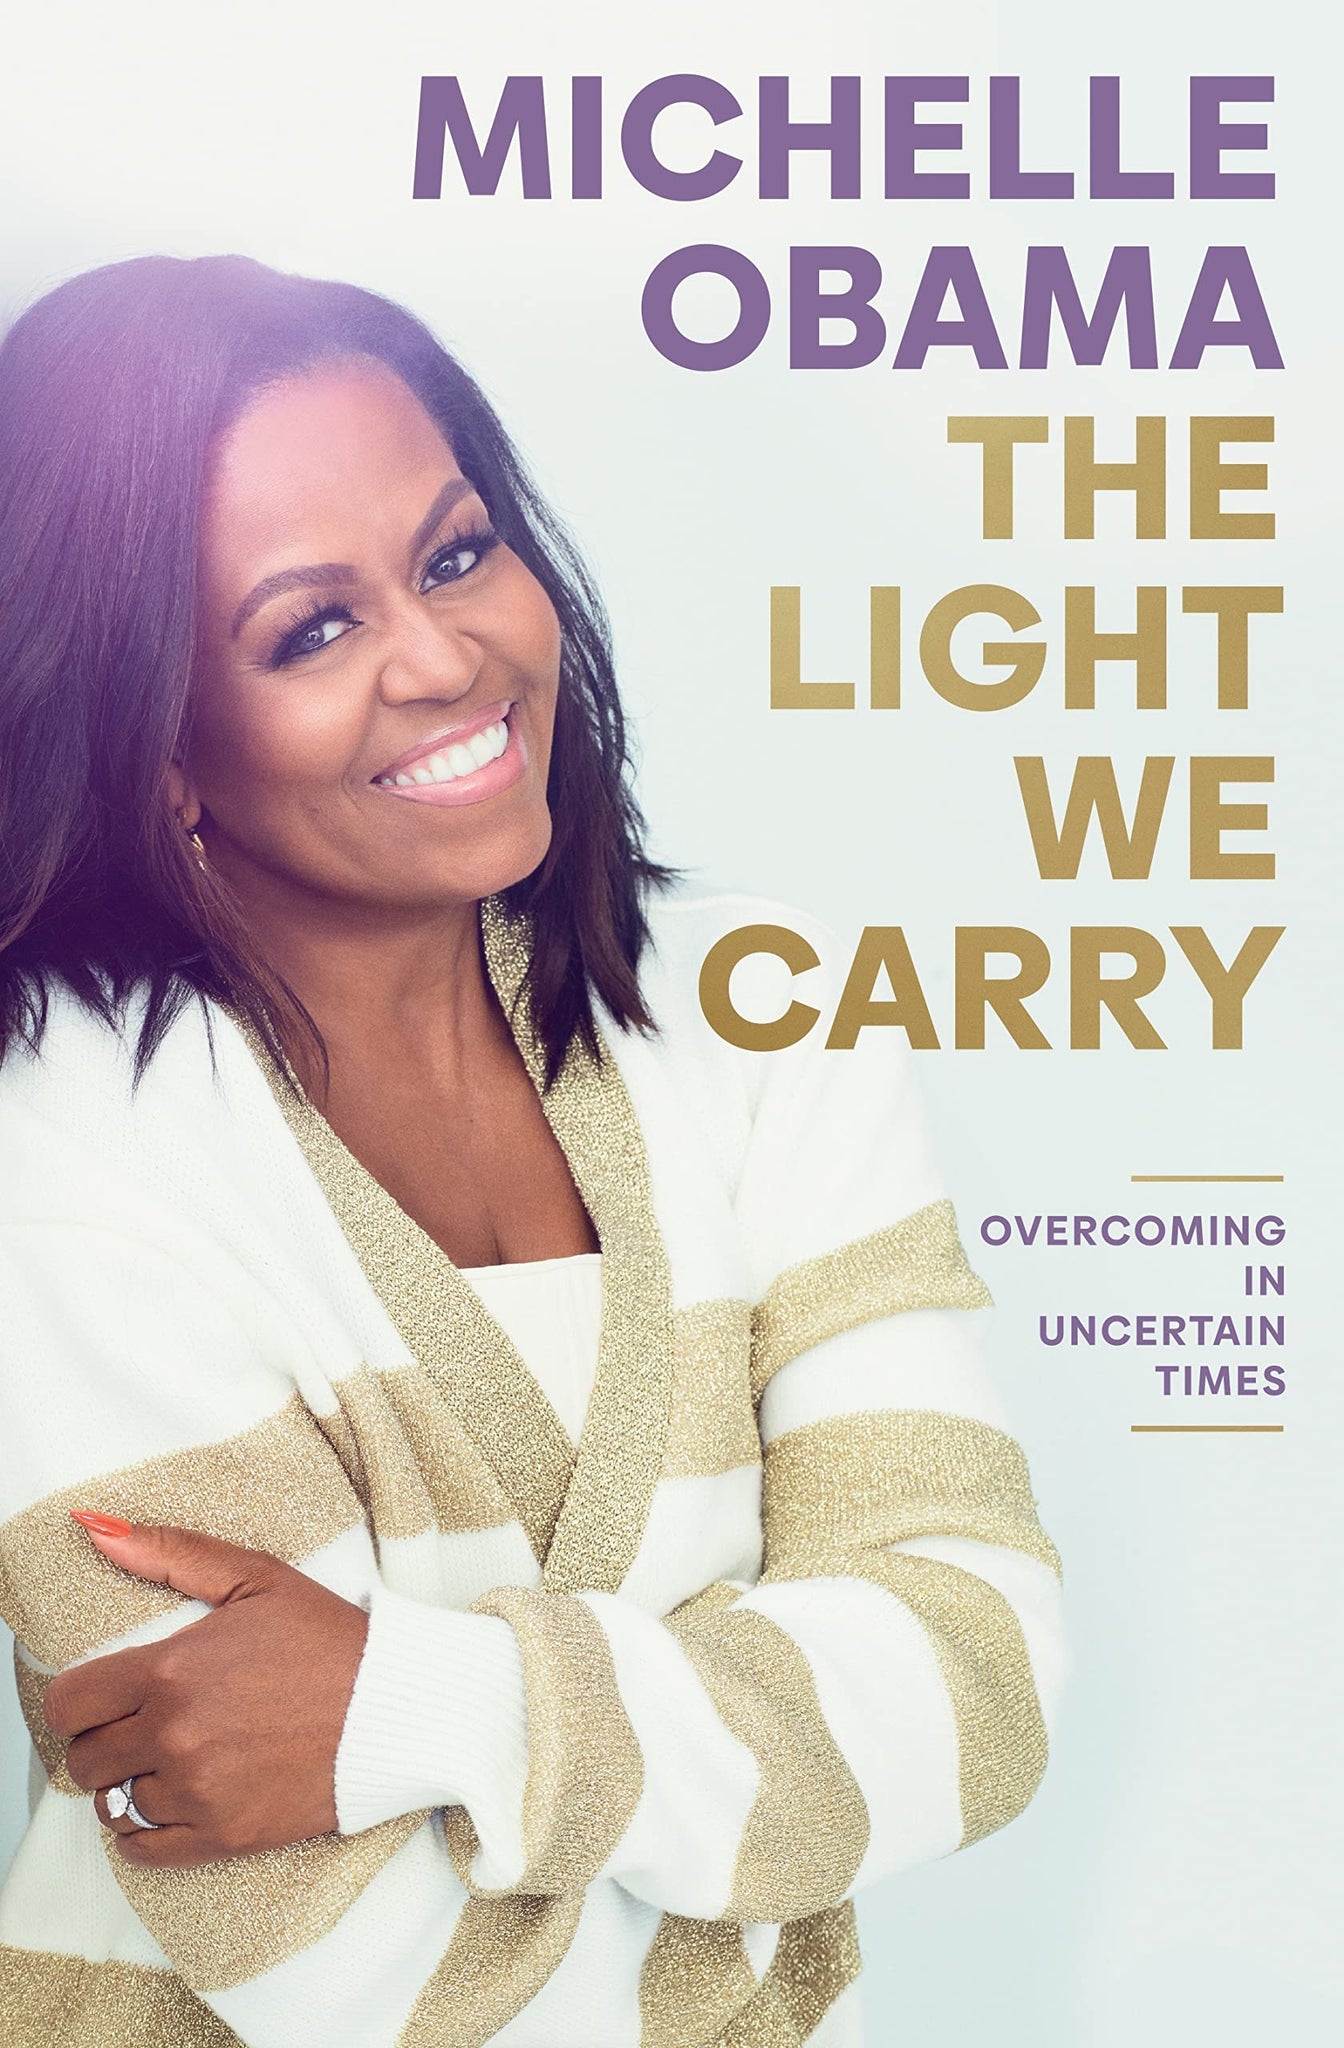 The Light We Carry: Overcoming in Uncertain Times  by Michelle Obama